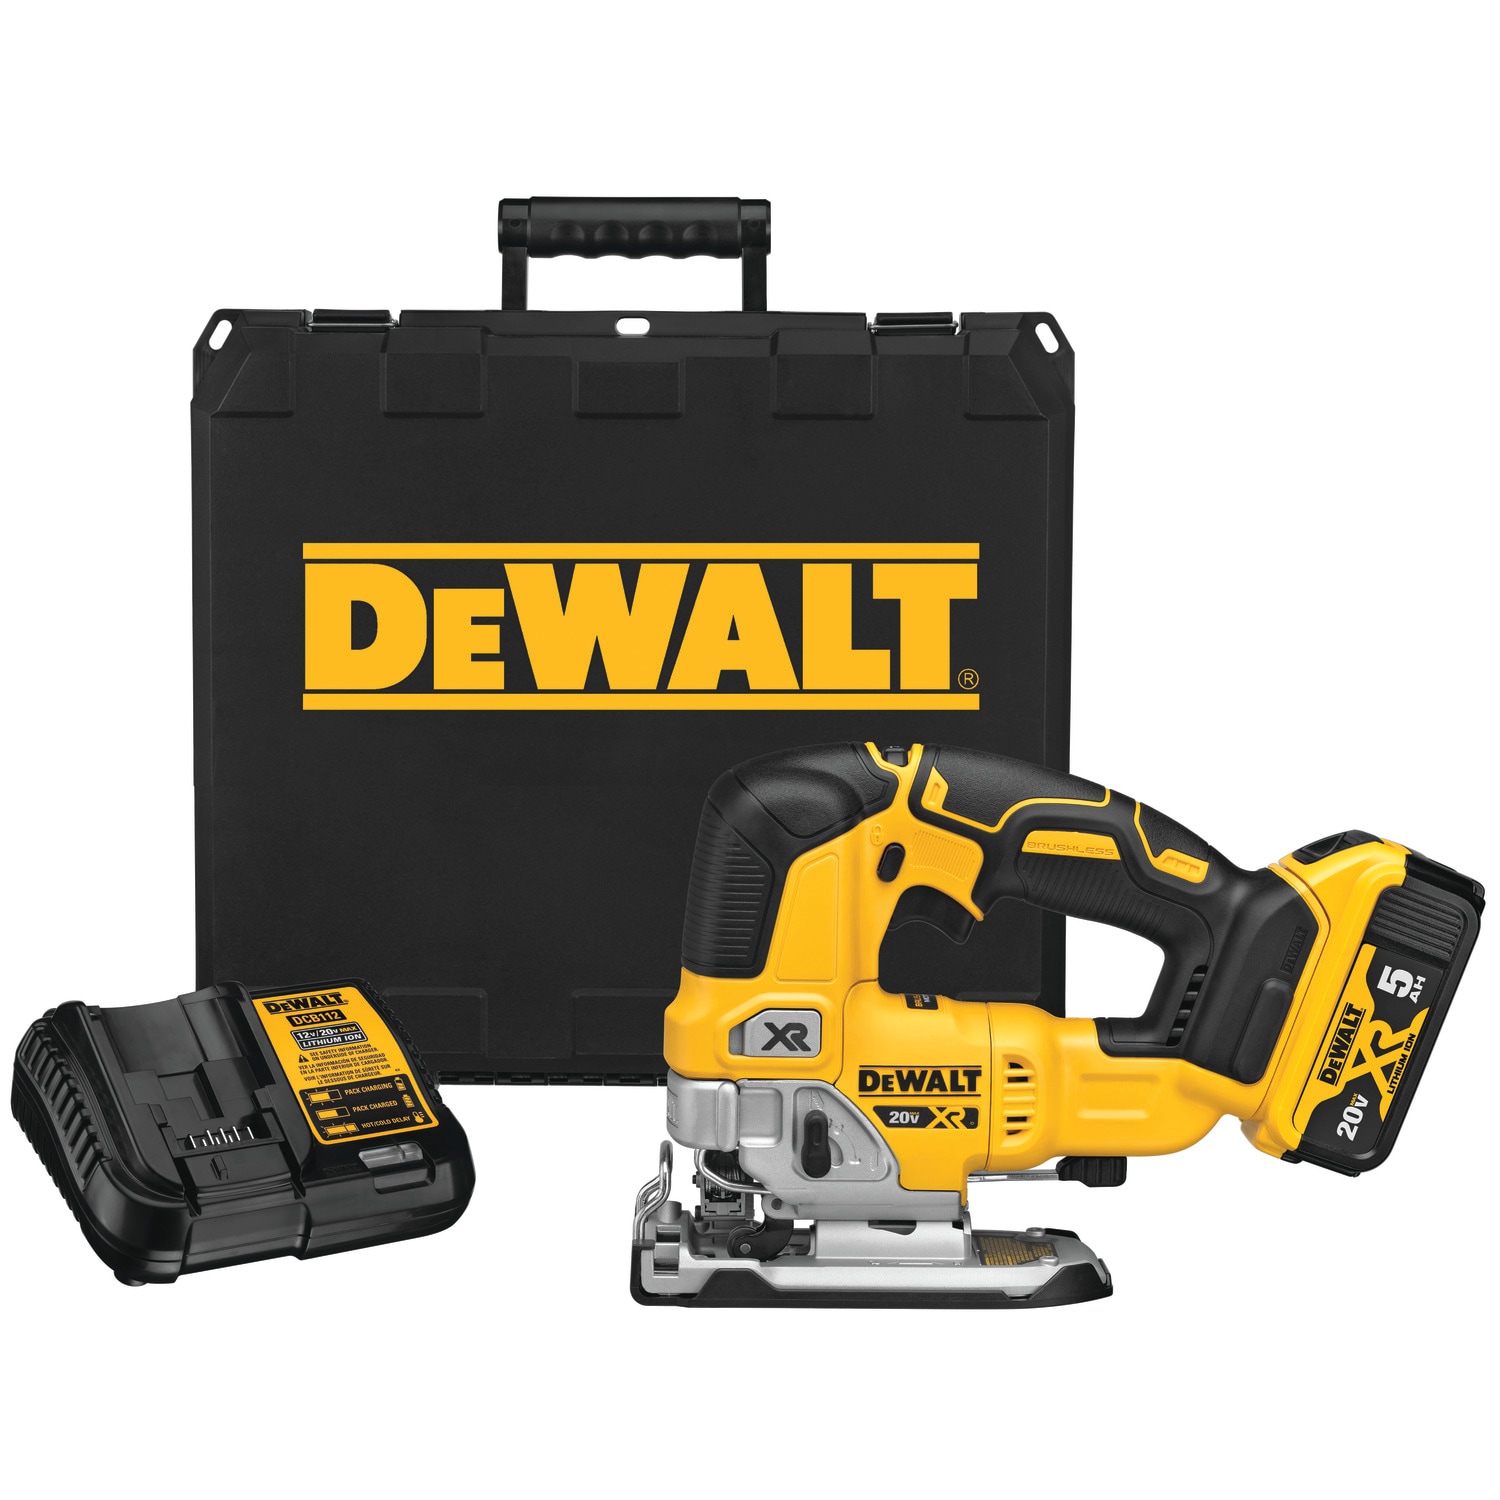 DEWALT XR 20-Volt Max Brushless Variable Speed Keyless Cordless Jigsaw (Charger and Battery Included) the Jigsaws department at Lowes.com